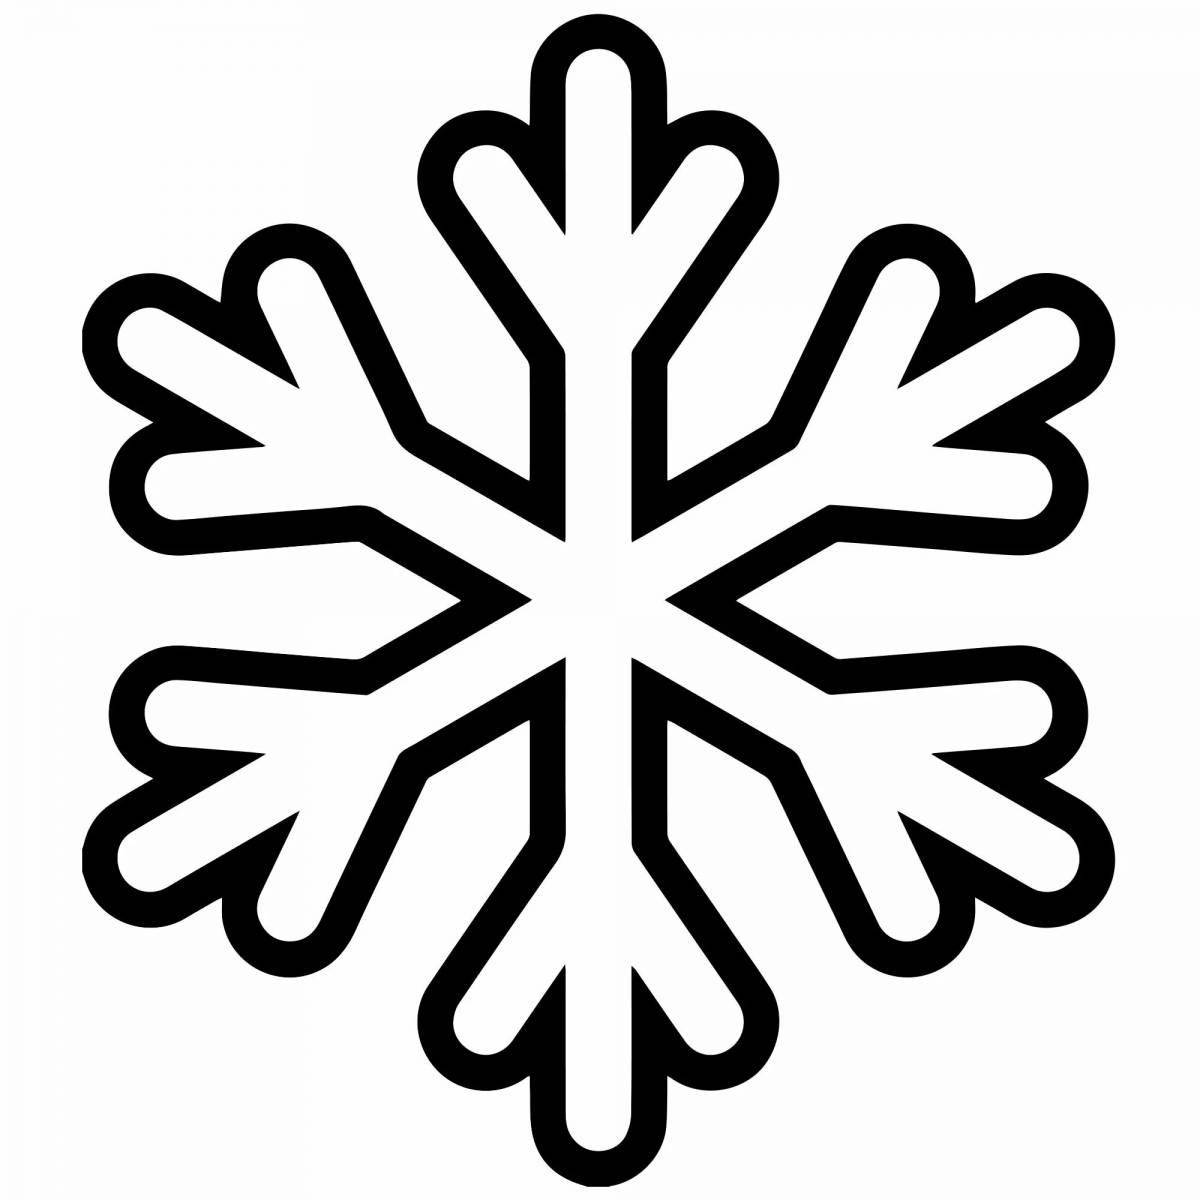 Shiny snowflake coloring pages for 4-5 year olds